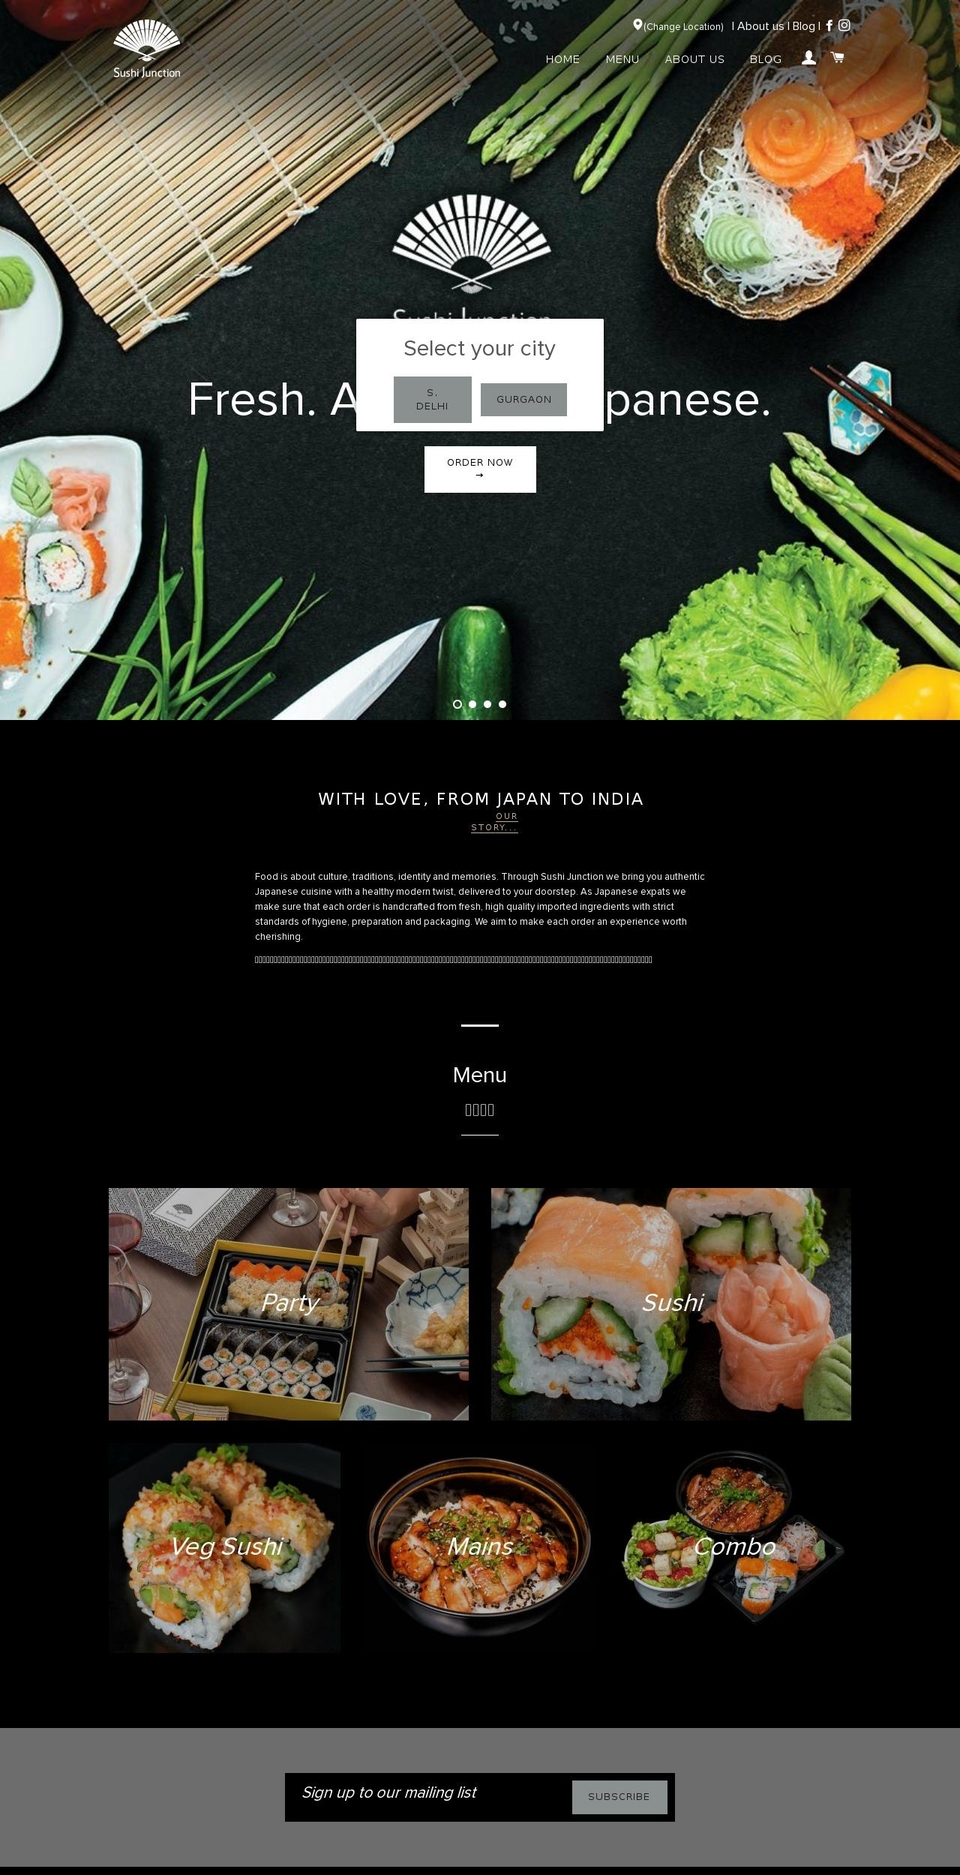 Refresh Shopify theme site example sushijunction.com